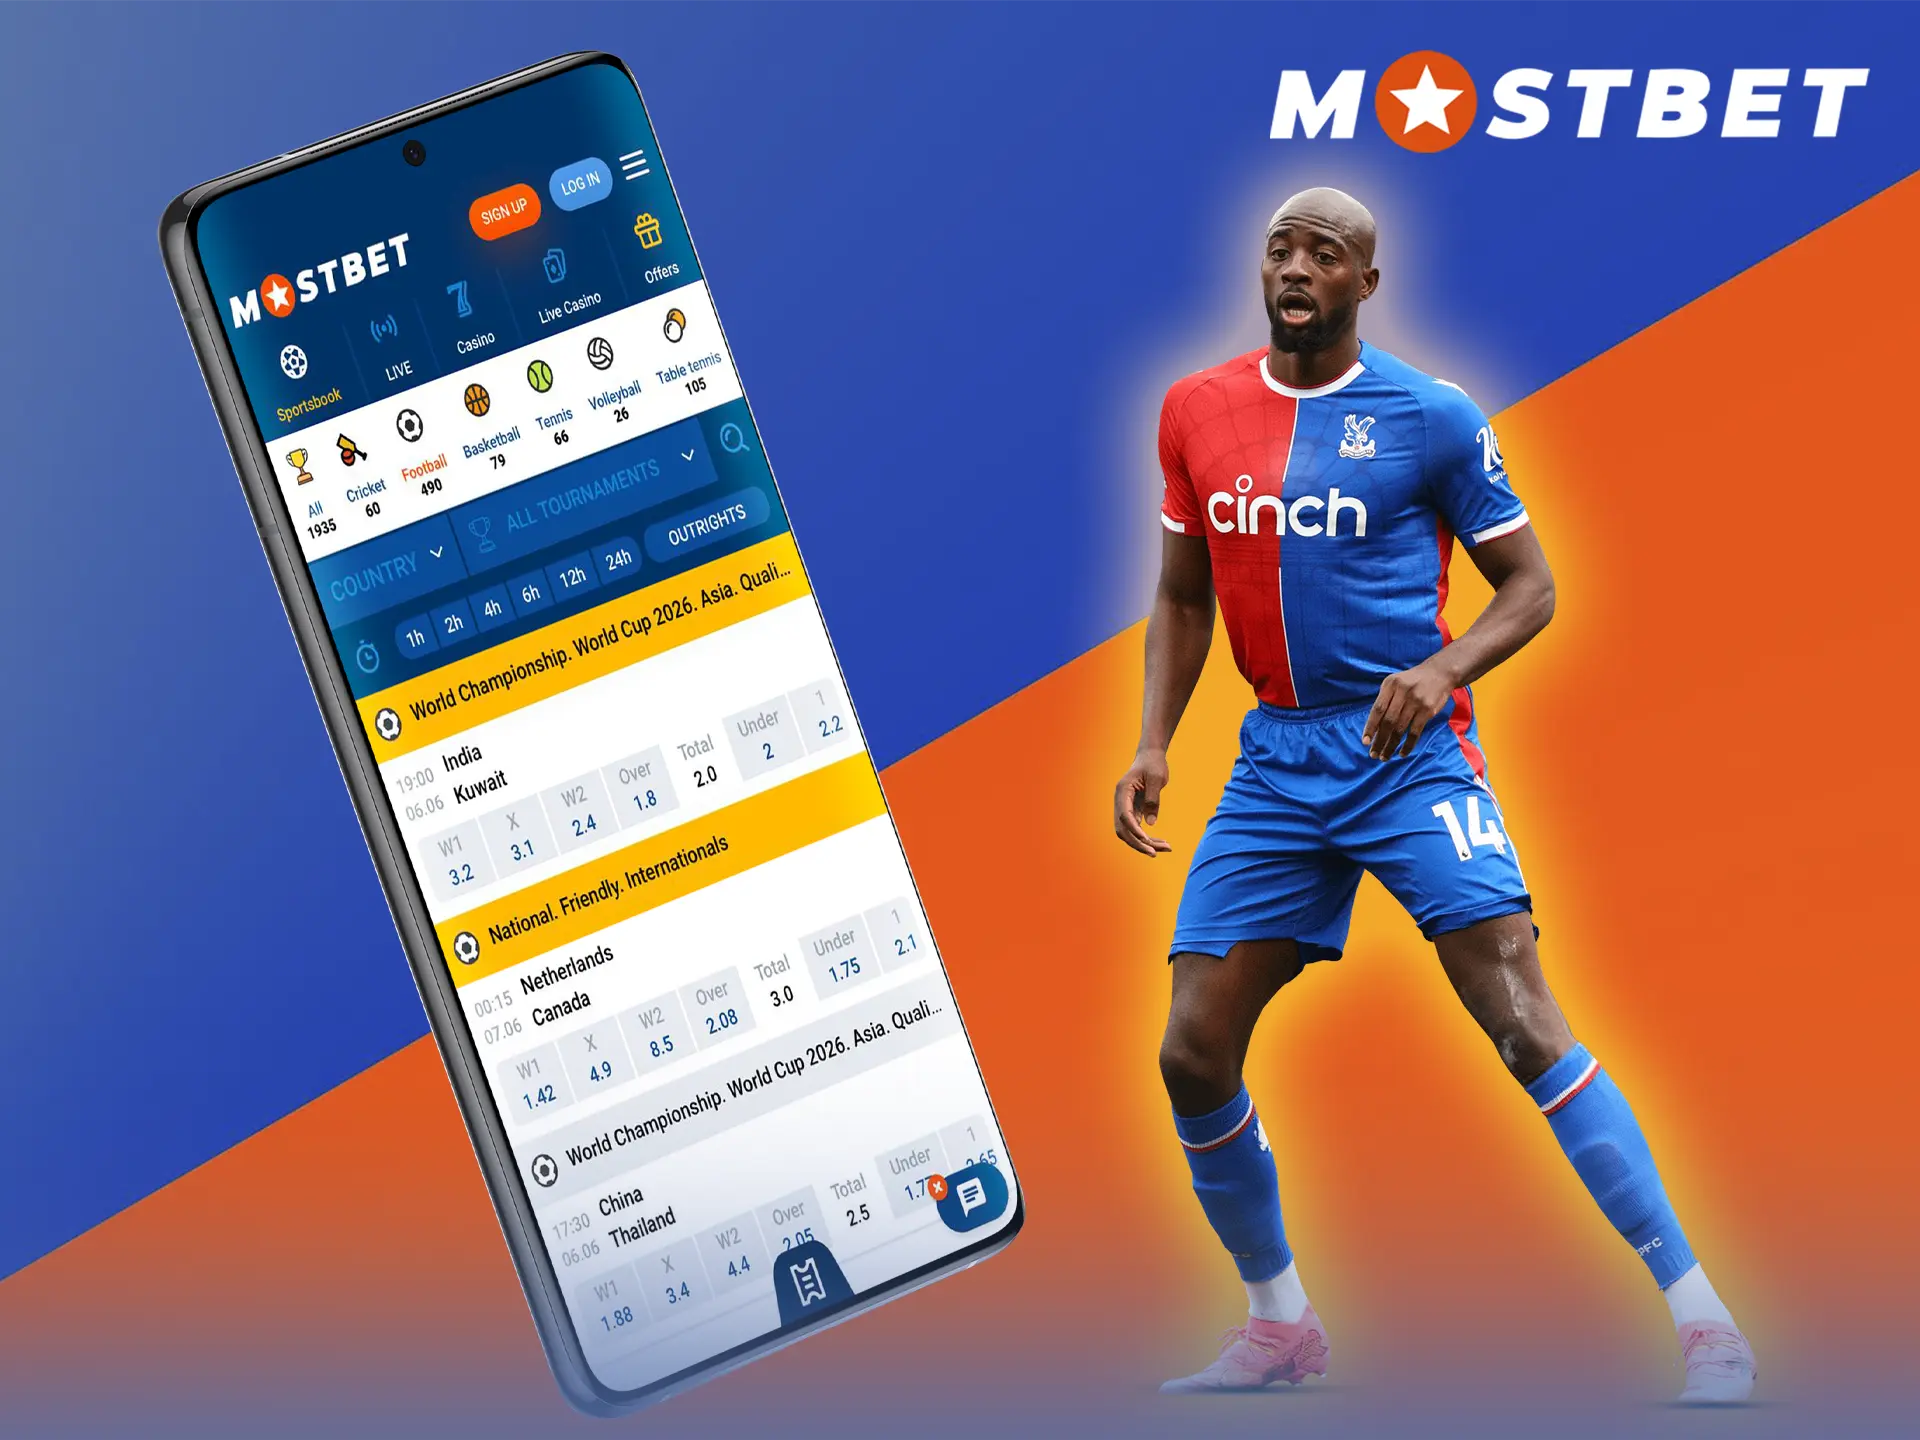 Mostbet gives its users high odds on football events and an app with instant download.